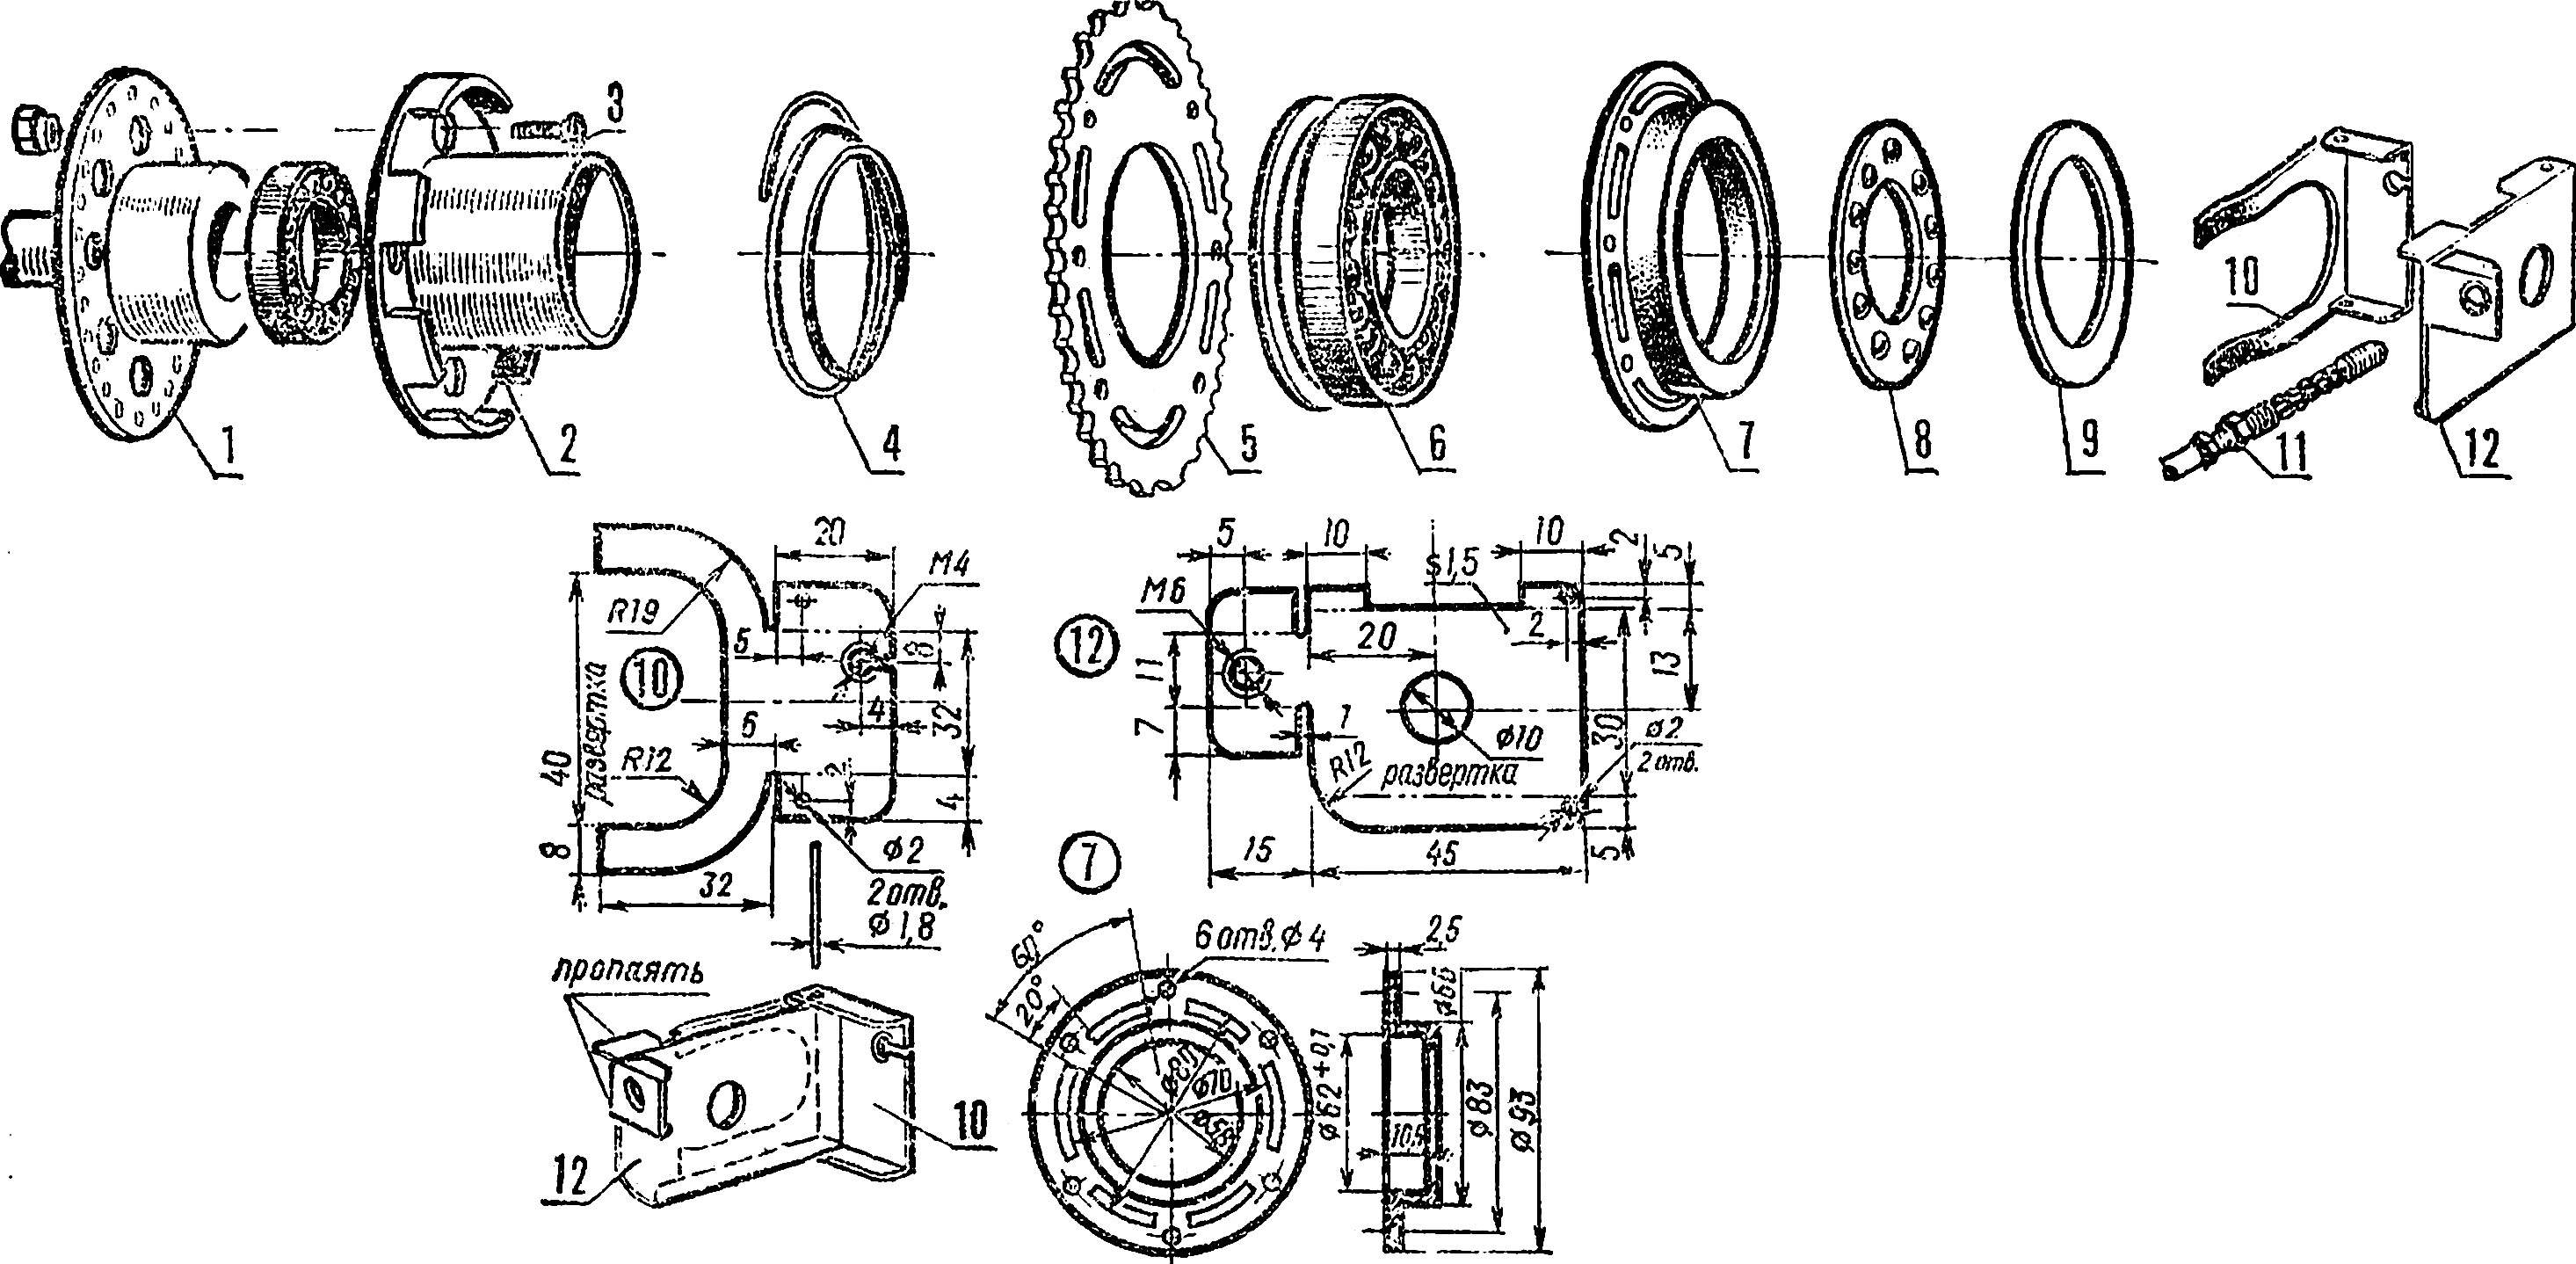 Fig. 2. Details of the clutch and drive it.